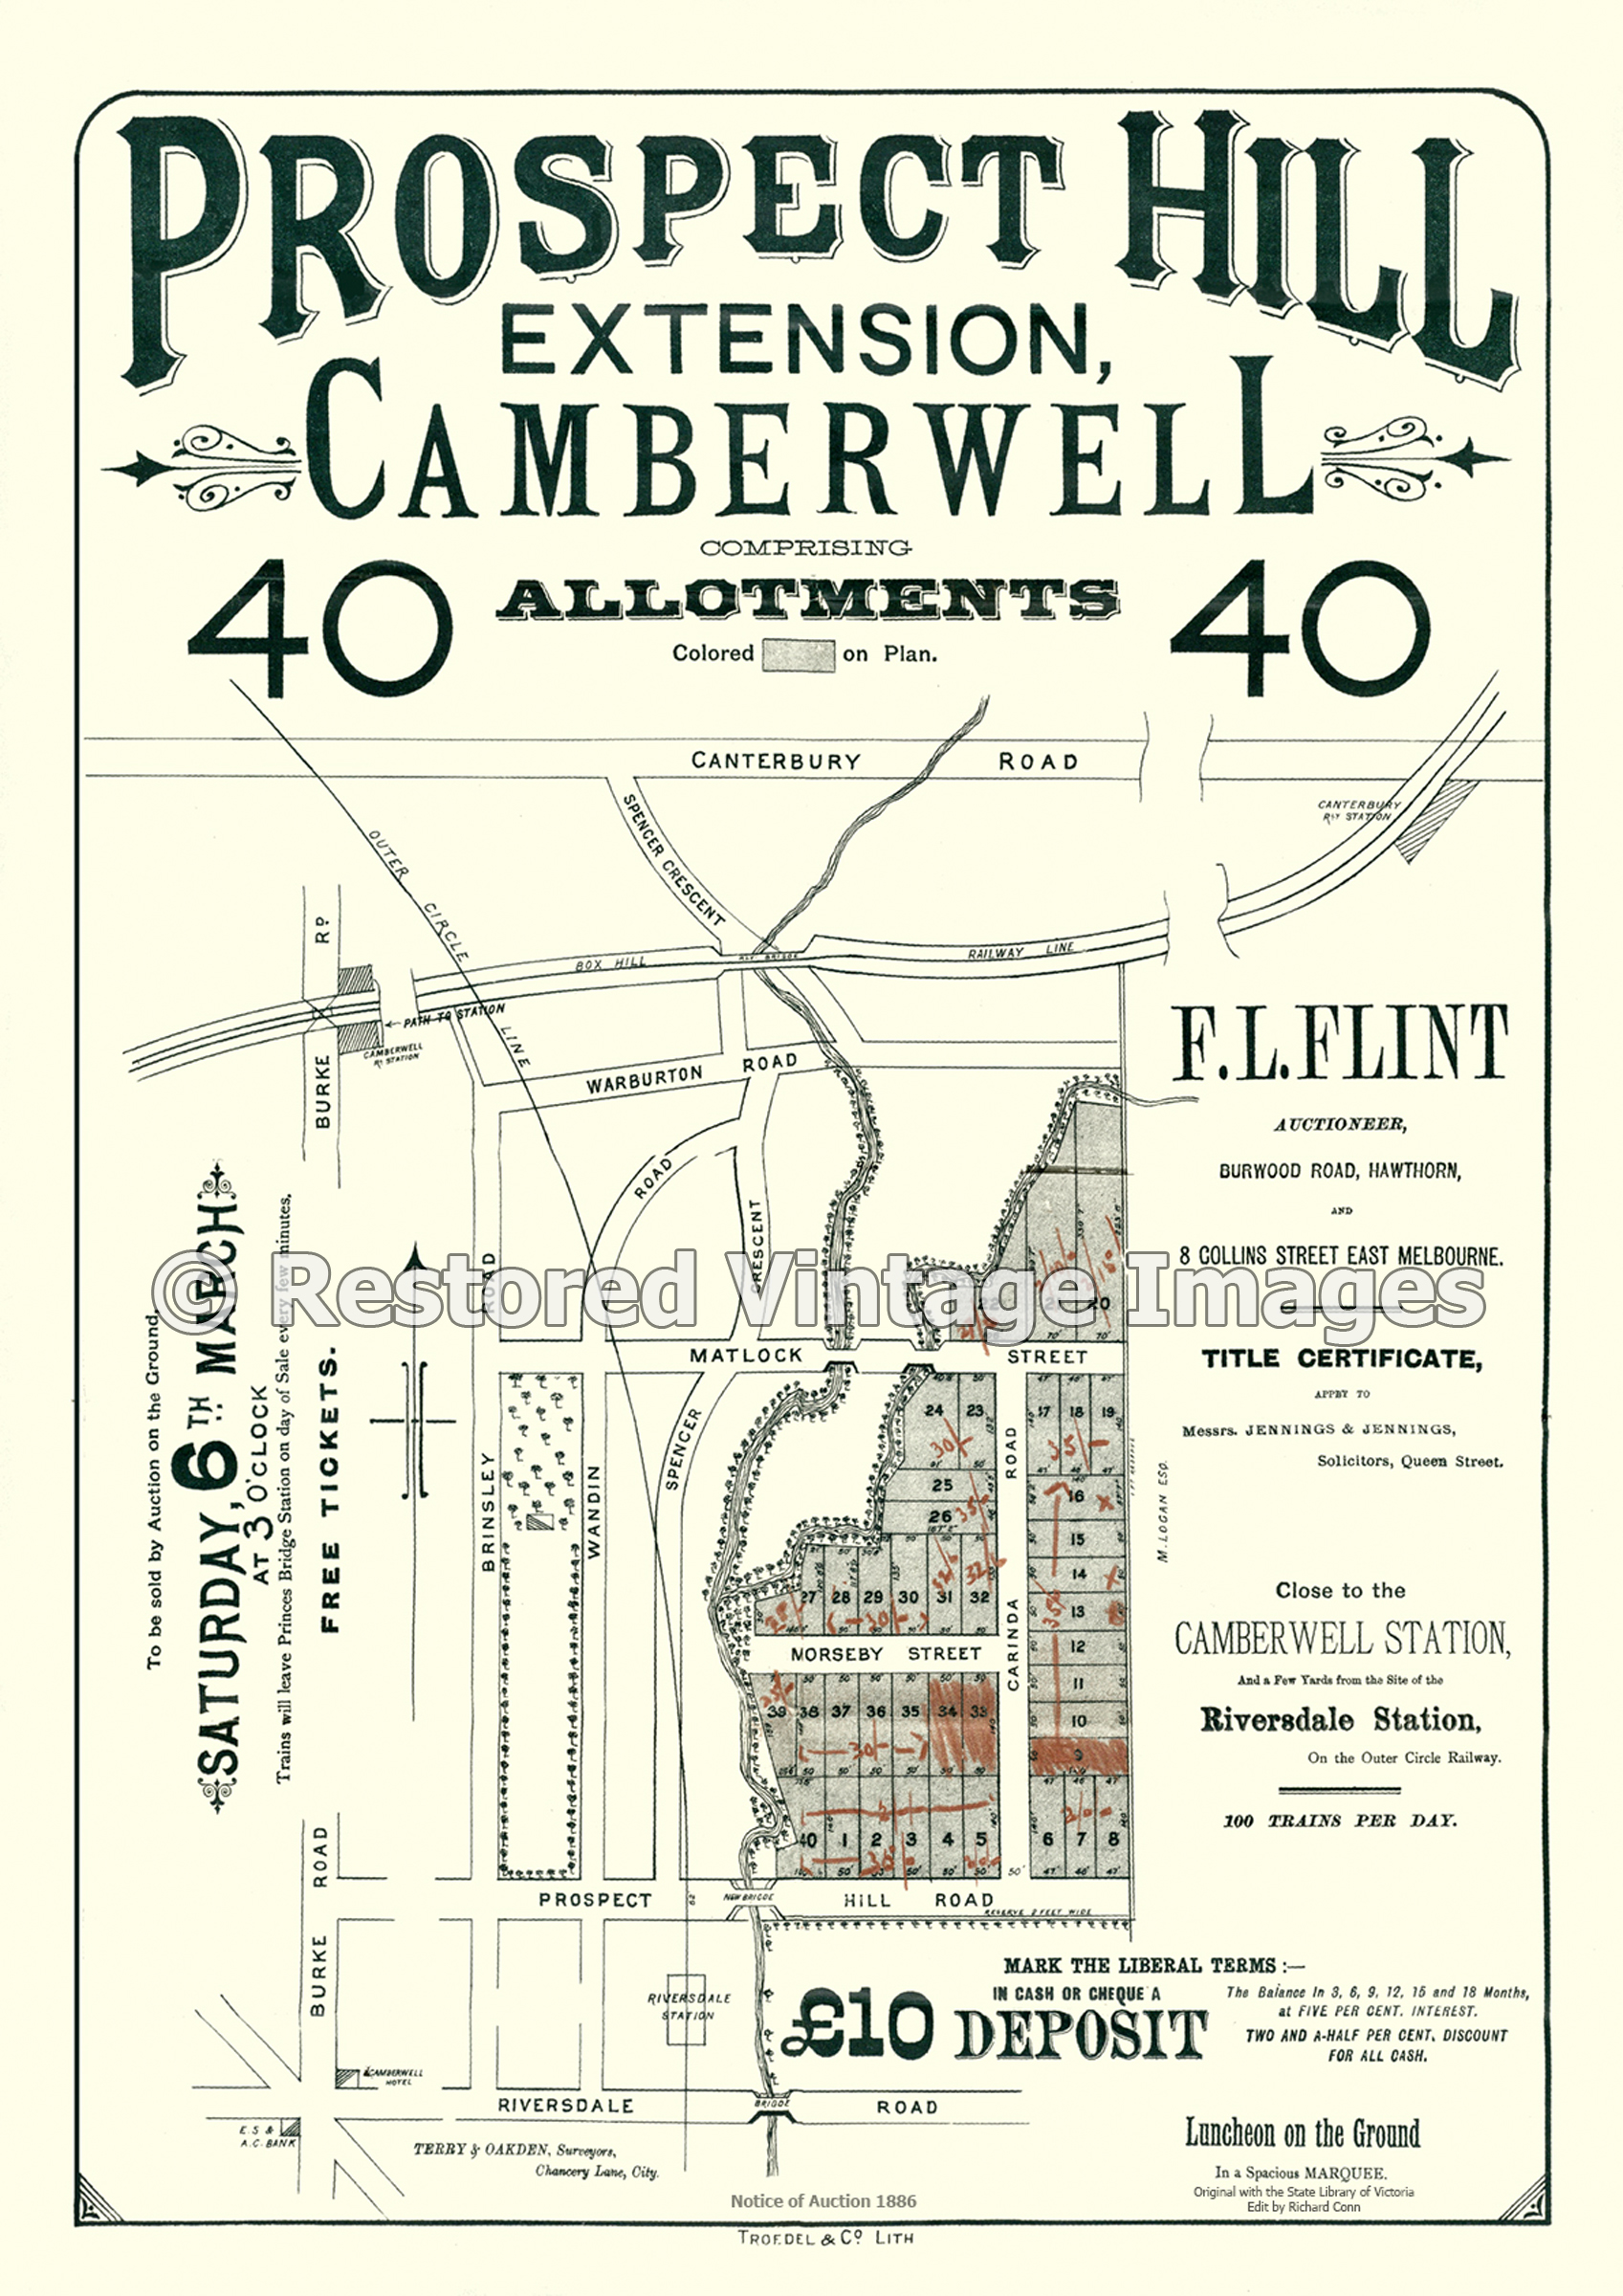 Prospect Hill Extension Camberwell 1886 – Canterbury/Camberwell